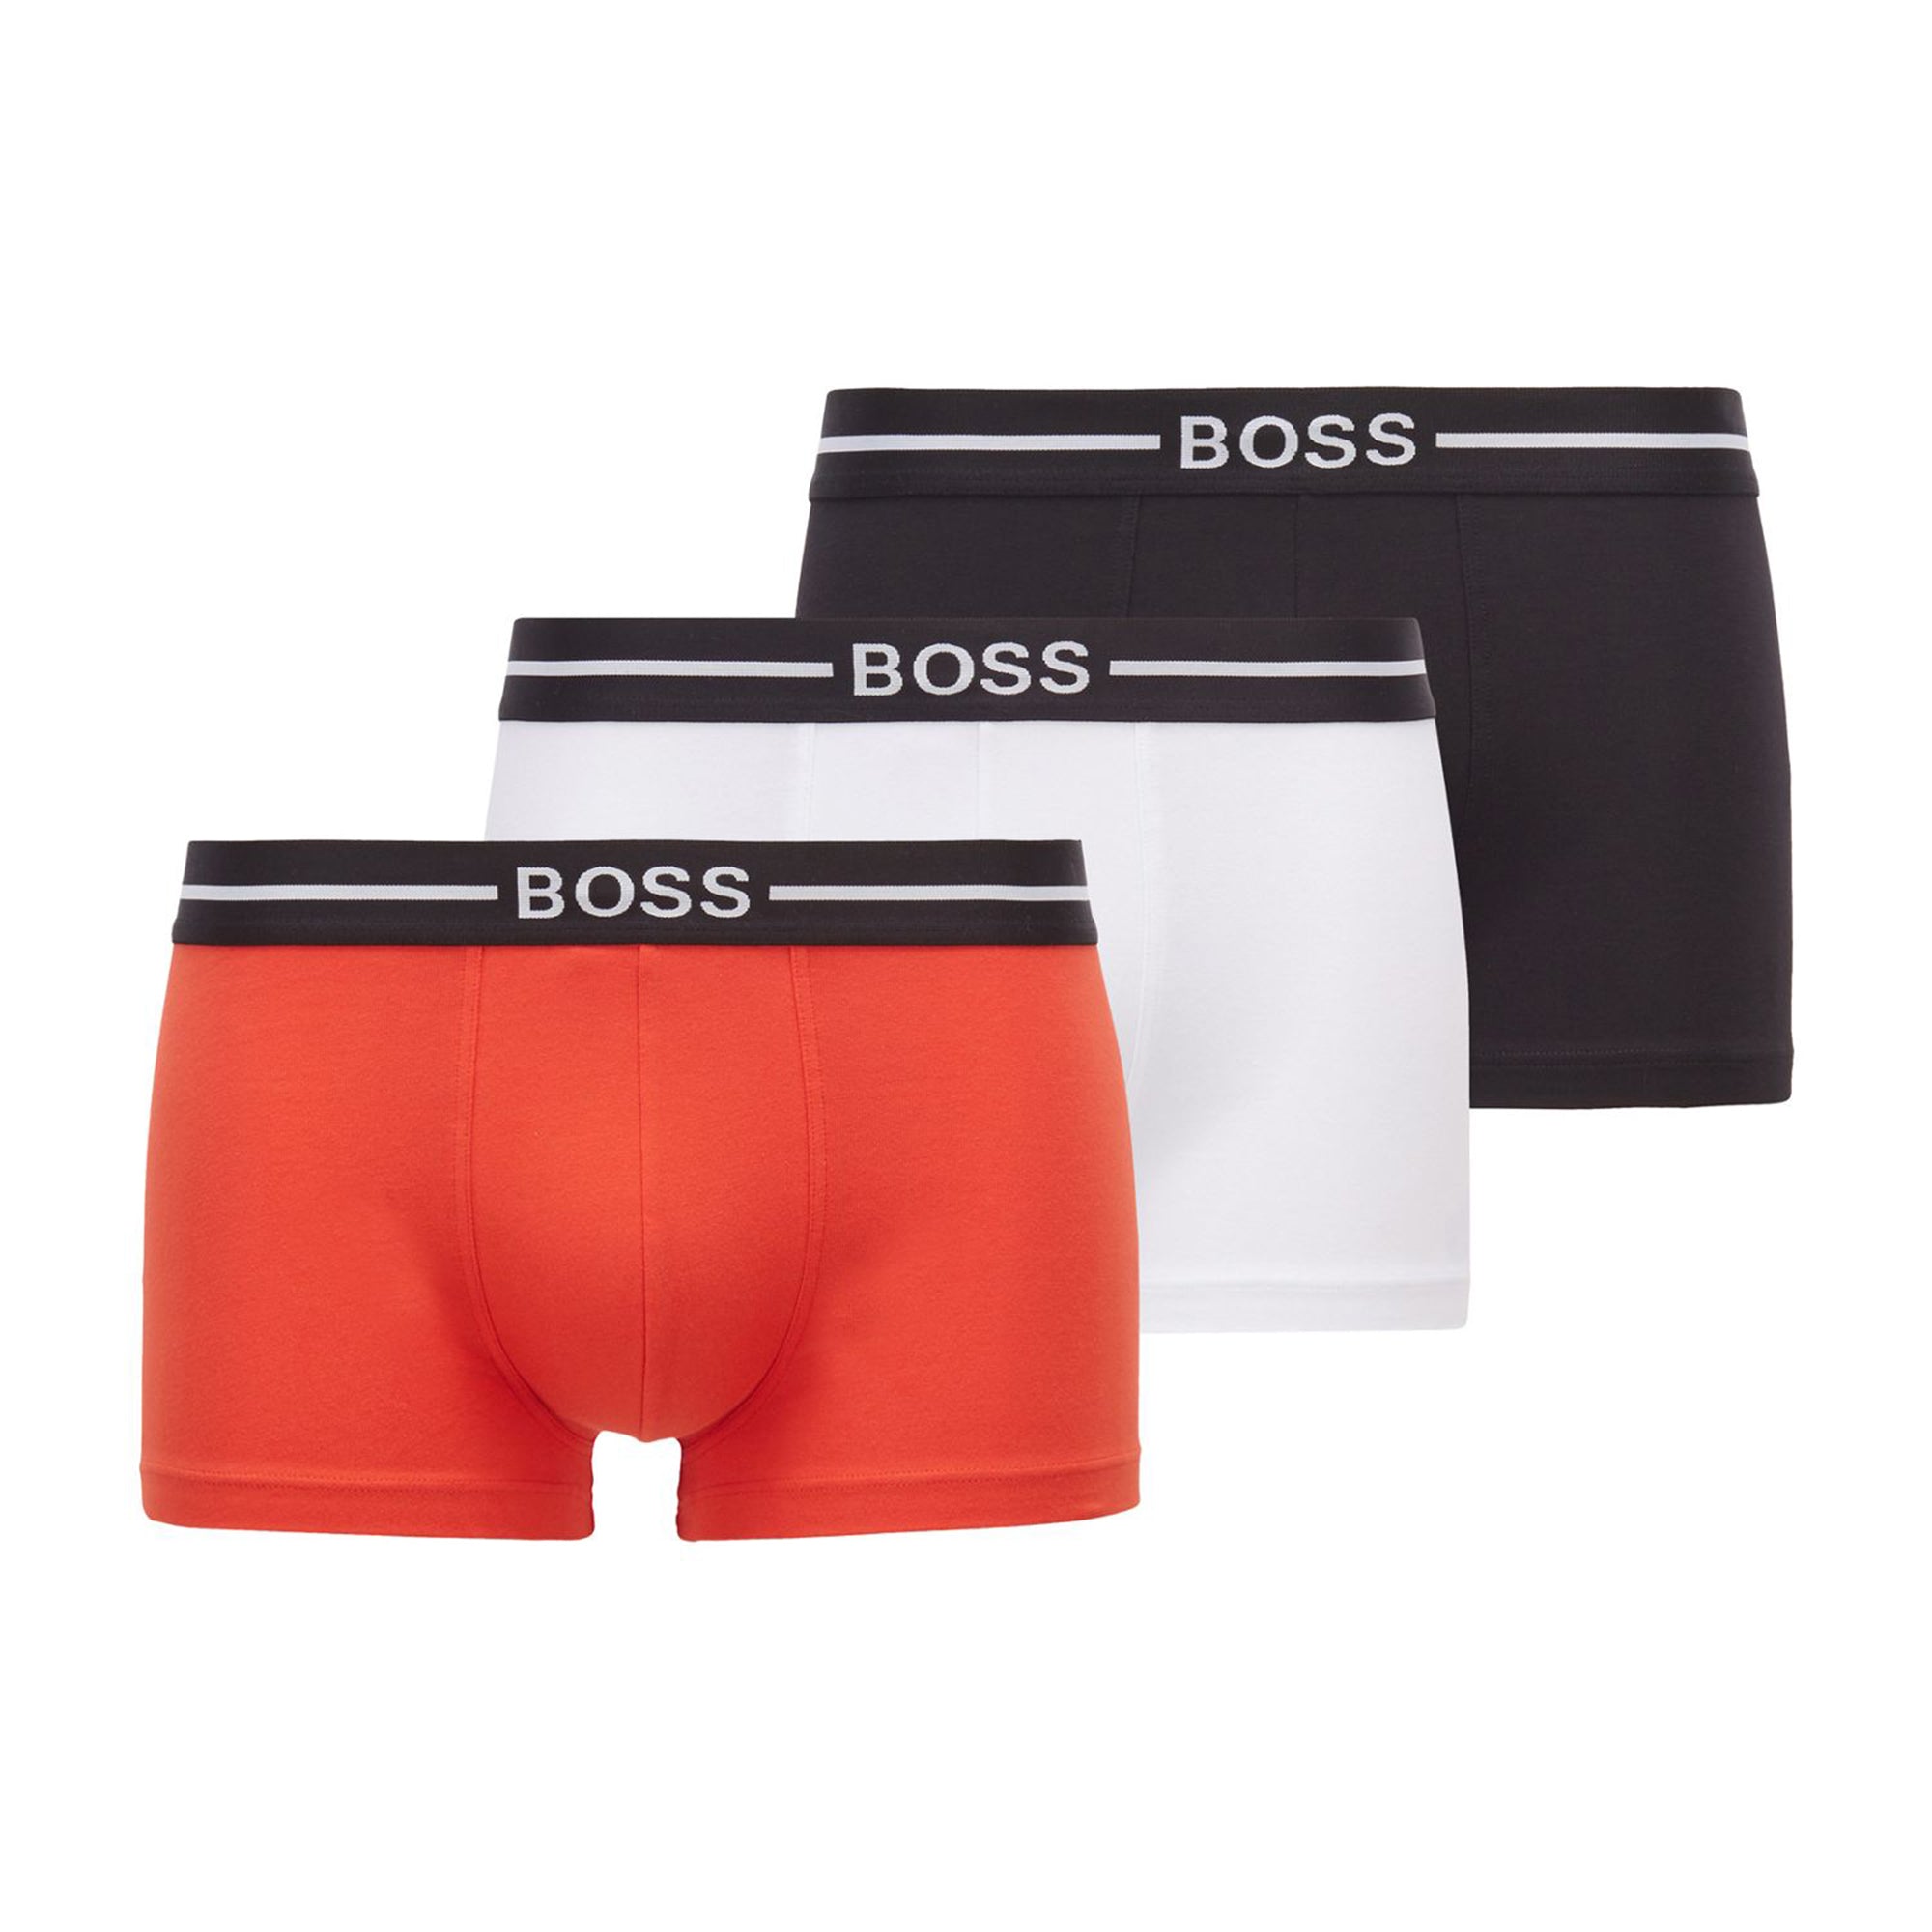 BOSS Organic Cotton Trunk 3-Pack 50451408 Red 640 | Function18